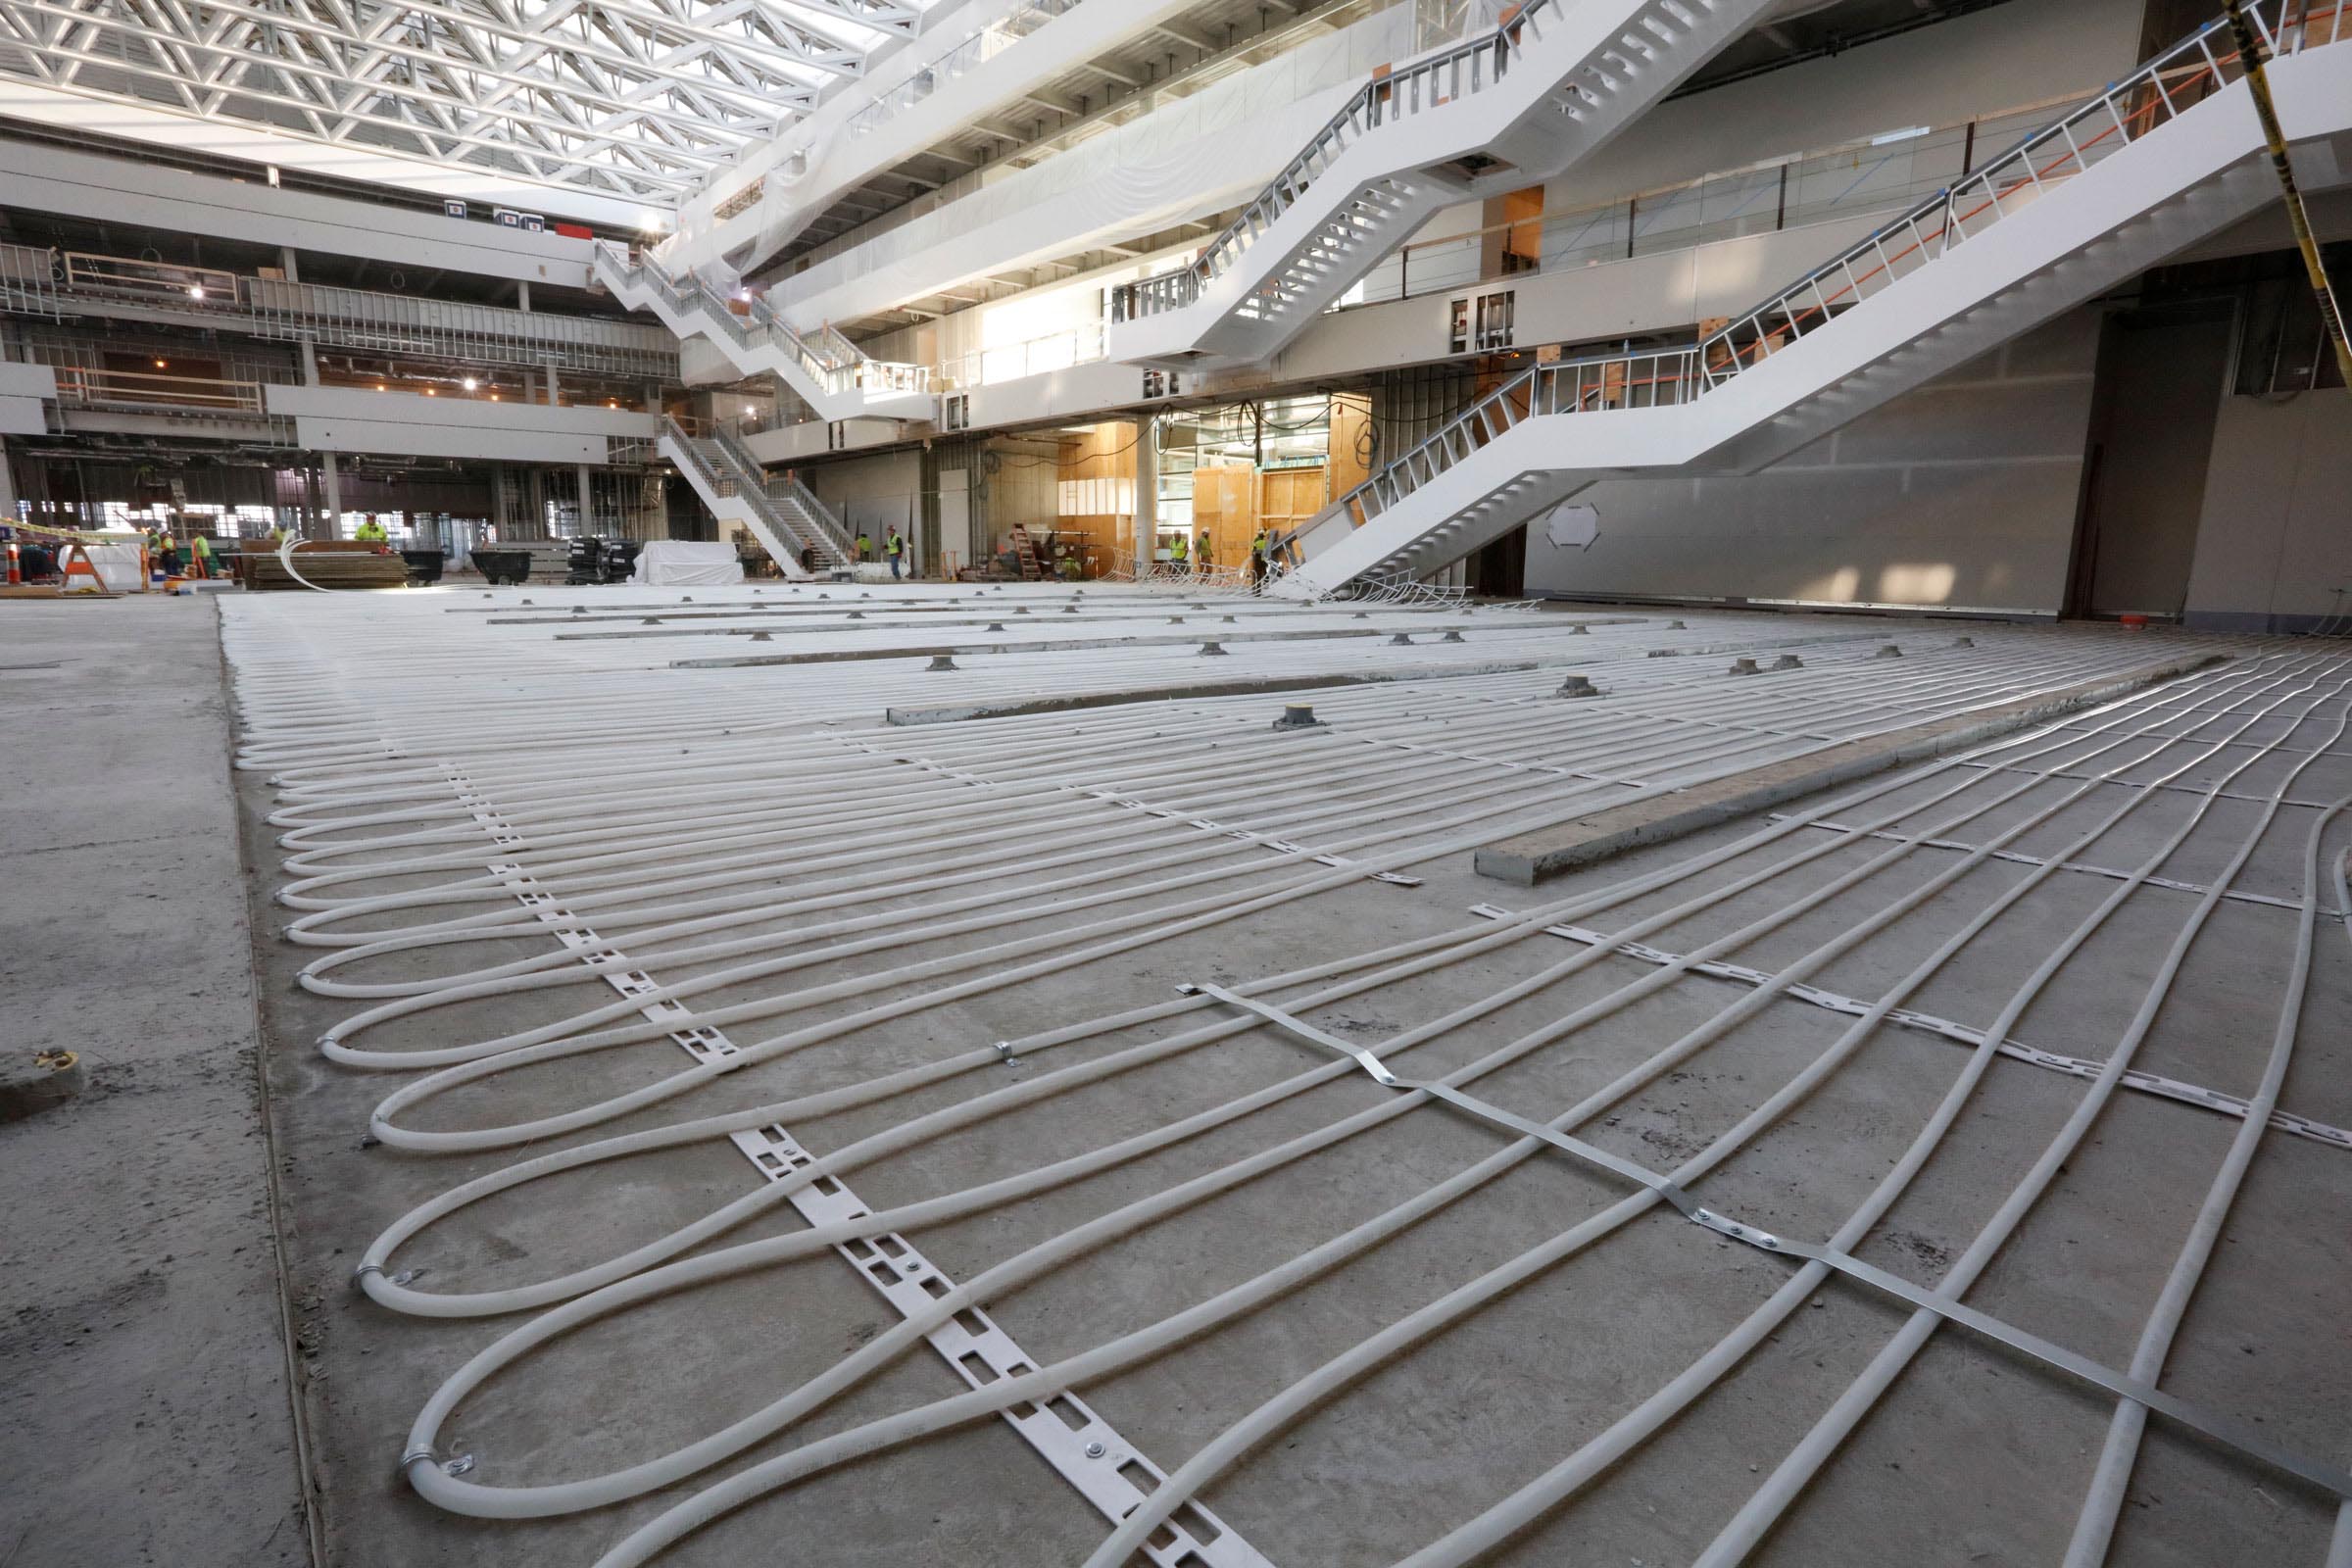 How Radiant Heating Promotes Sustainability and Indoor Environmental Quality